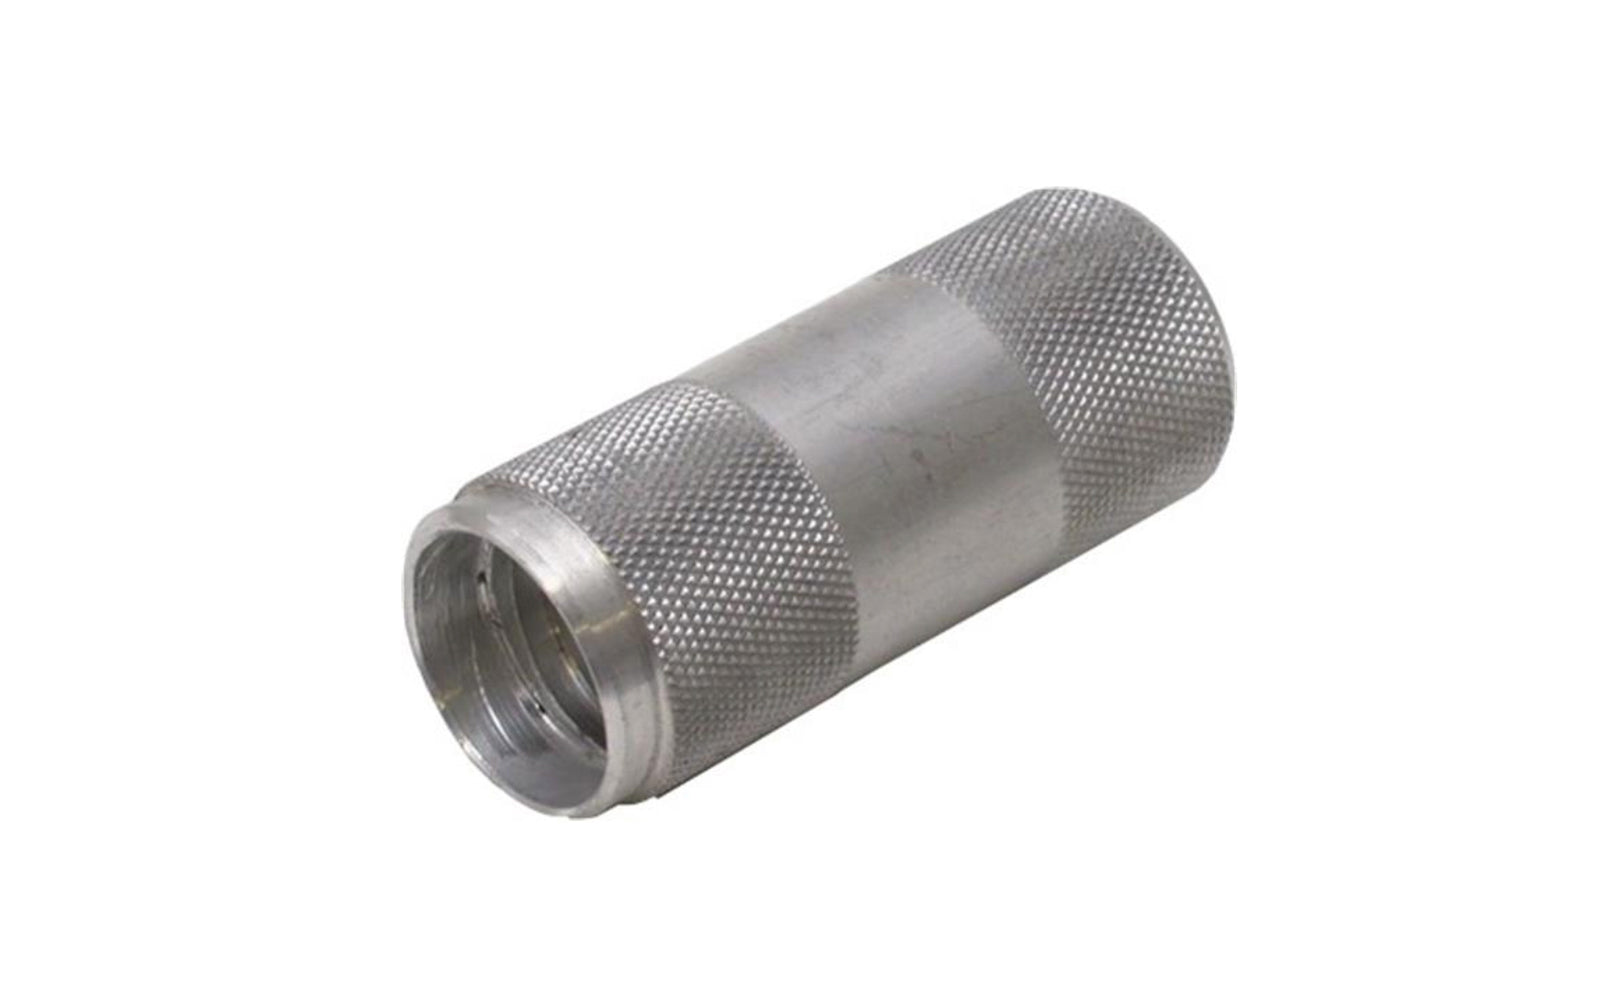 Marshalltown sanding pole adapter piece. Connects male threaded wood handles to a standard sander head ~ Model 14429 ~ 035965144292